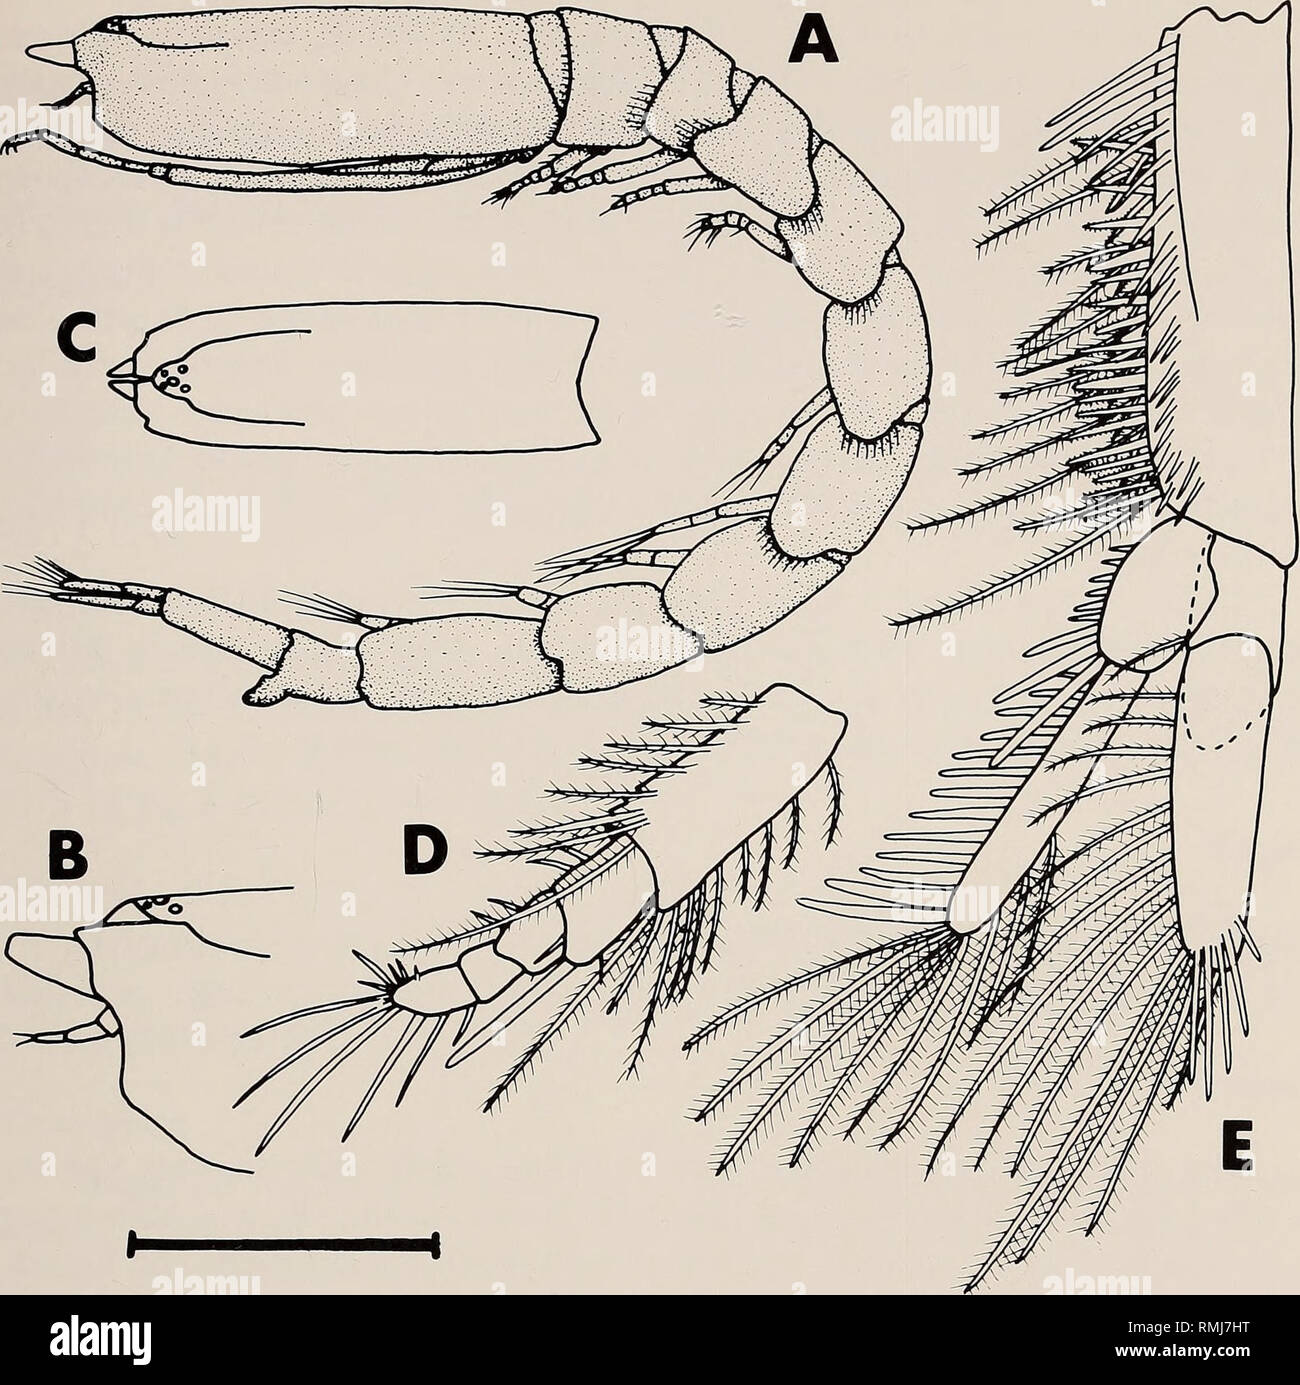 . Annals of the South African Museum = Annale van die Suid-Afrikaanse Museum. Natural history. SOUTHERN AFRICAN CUMACEA: PART 2 207. Fig. 18. Iphinoe stebbingi Adult male. A. Lateral view. B. Detail of anterior tip of carapace. C. Dorsal view of carapace. D. Pereiopod 2. E. Uropod. Scale line = 3 mm for A, C; 1 mm for B; 0,5 mm for D-E. merus and carpus subequal in length and width to basis, each of the first four segments furnished with fans of stout setae. Propodus and dactyl small, cylindrical. Telsonic somite (Fig. 17K) one and a half times as long as broad, equal in length to peduncle of  Stock Photo